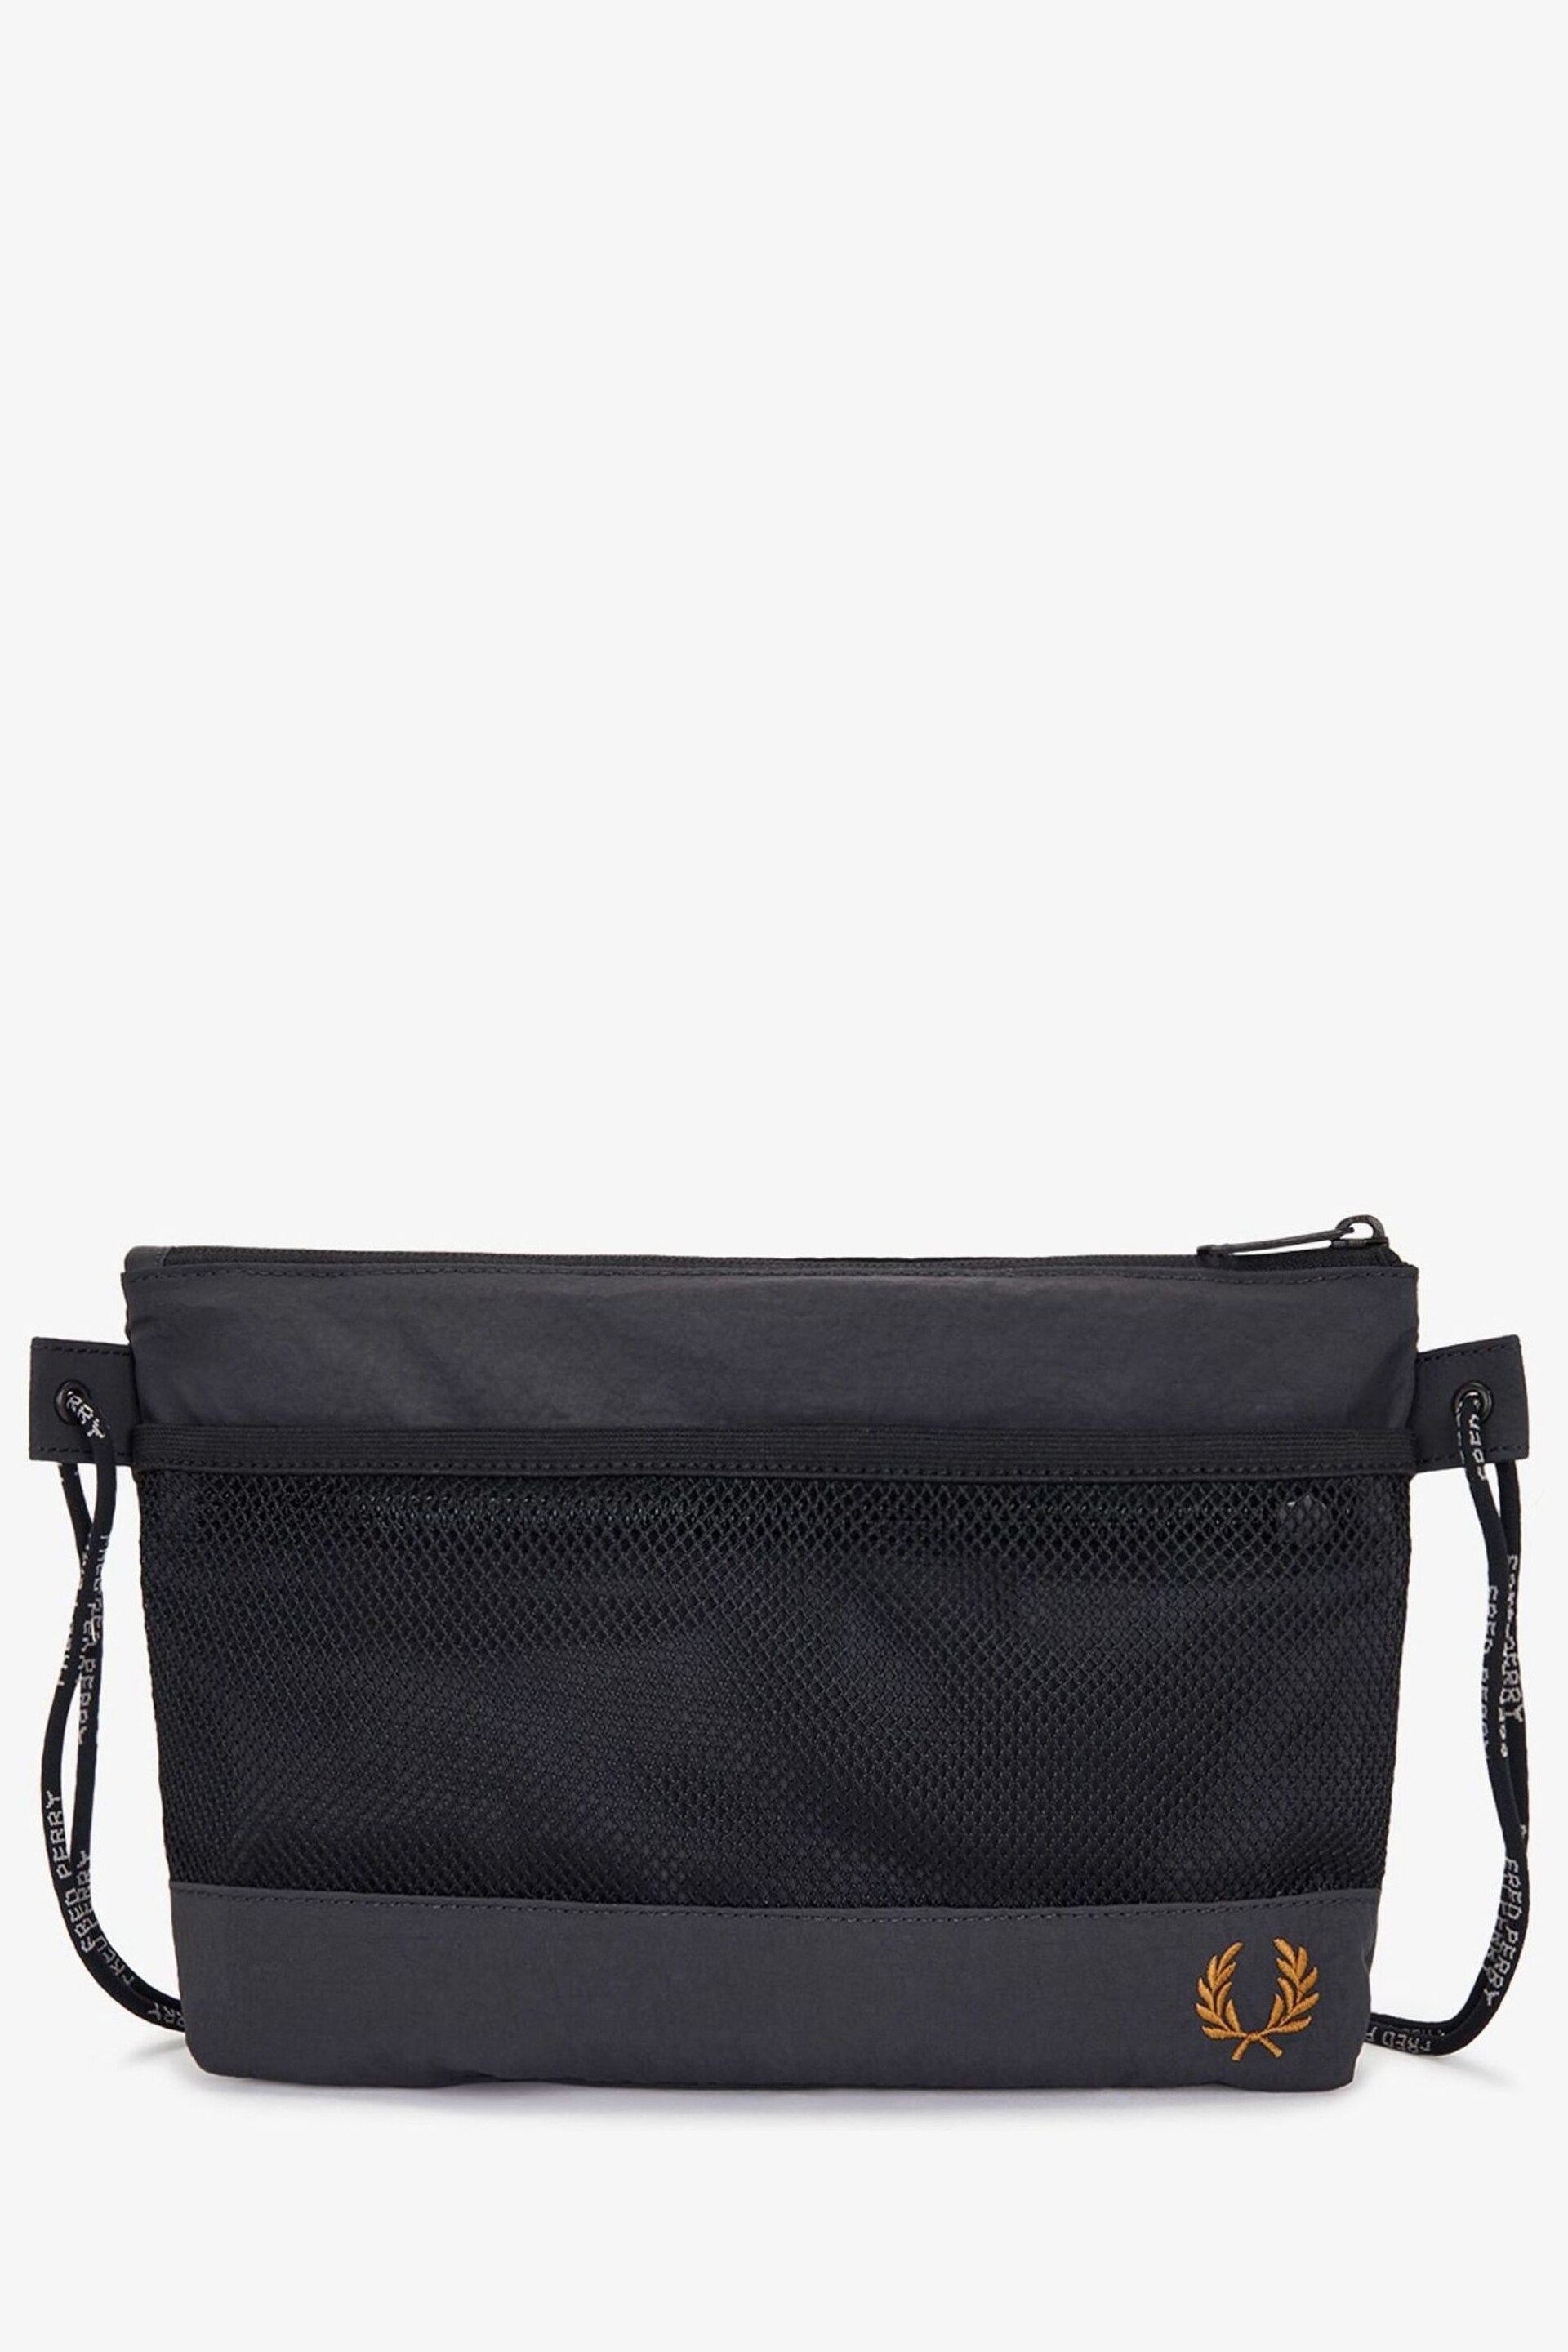 Fred Perry Grey Nylon Cross-Body Bag - Image 2 of 3